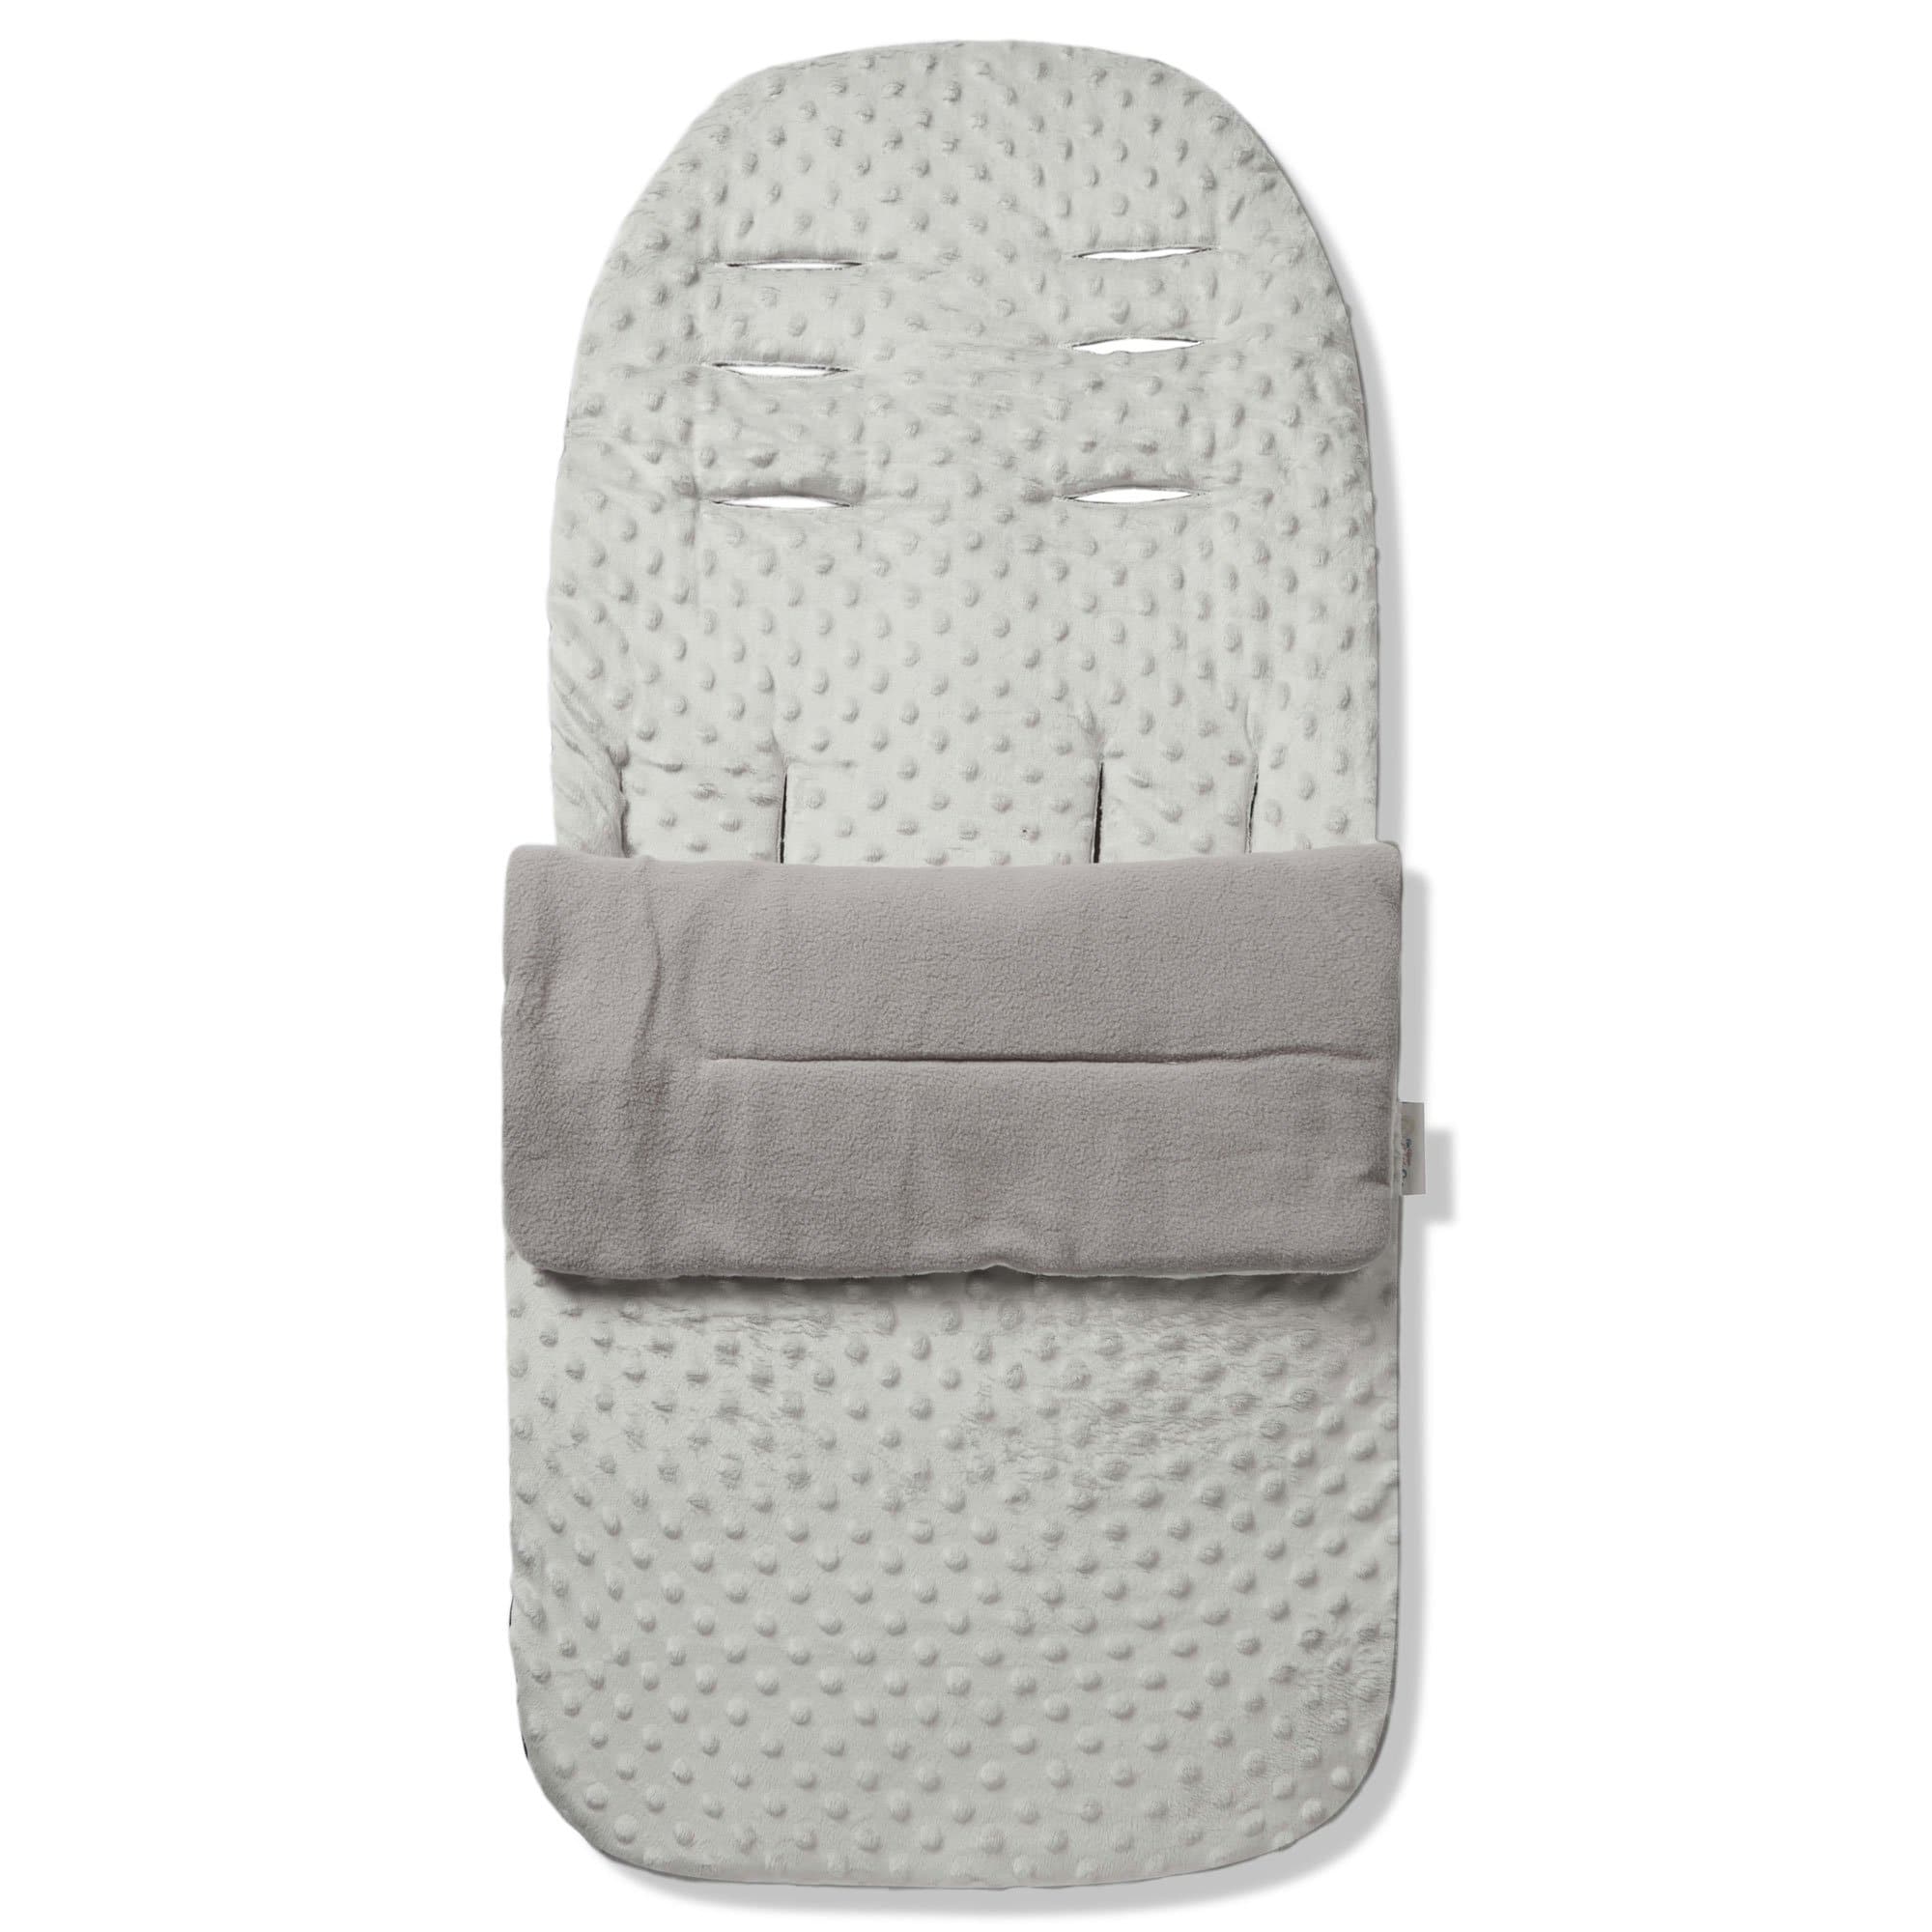 Dimple Footmuff / Cosy Toes Compatible with iCandy - Grey / Fits All Models | For Your Little One